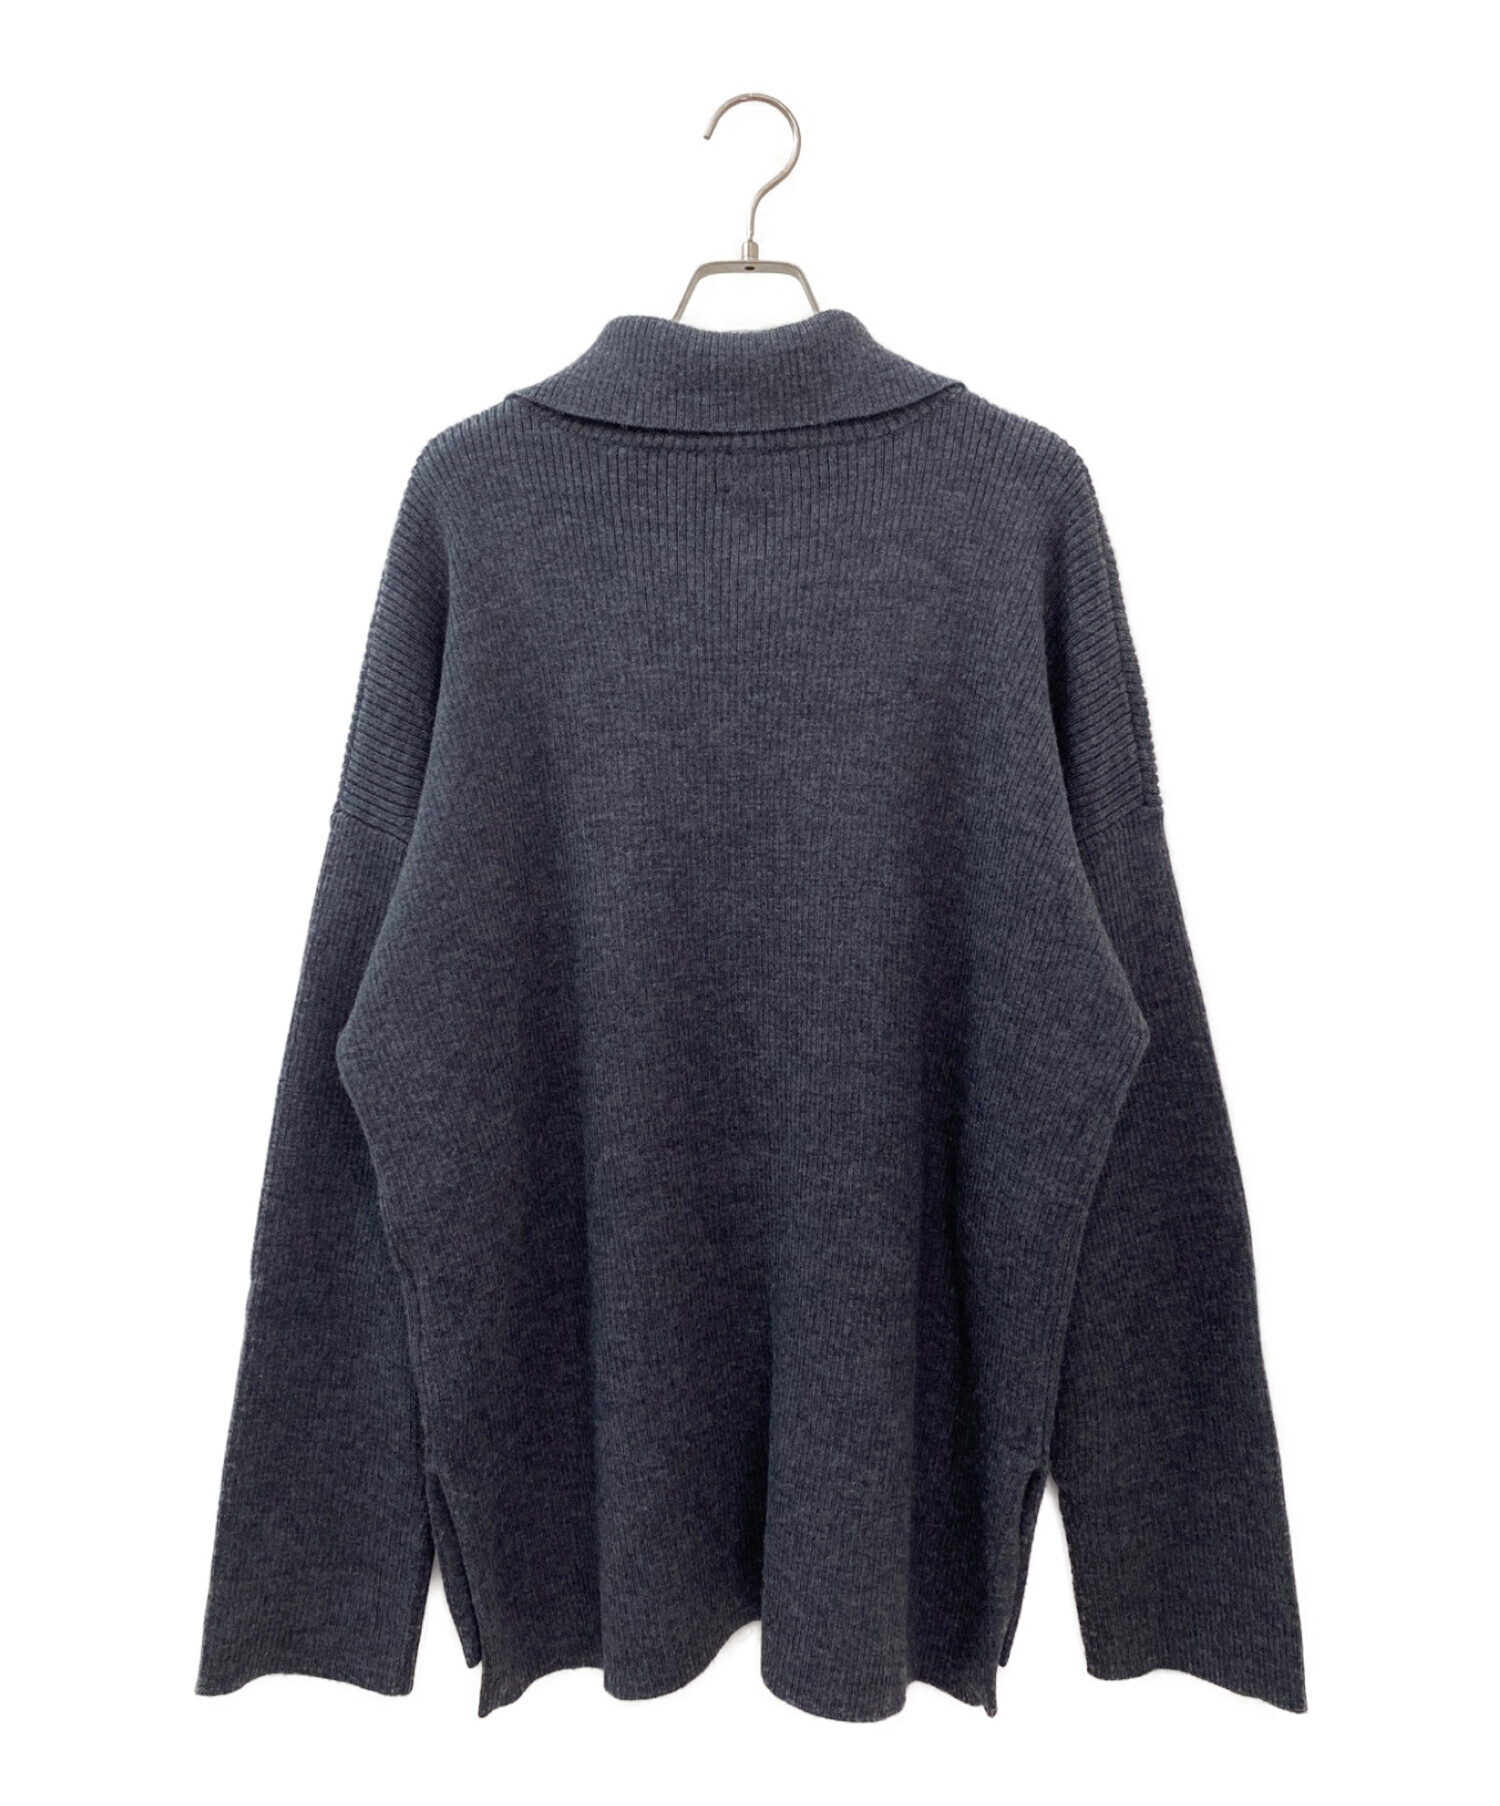 GOOD GRIEF!/グッドグリーフKnit Zipped Pullover